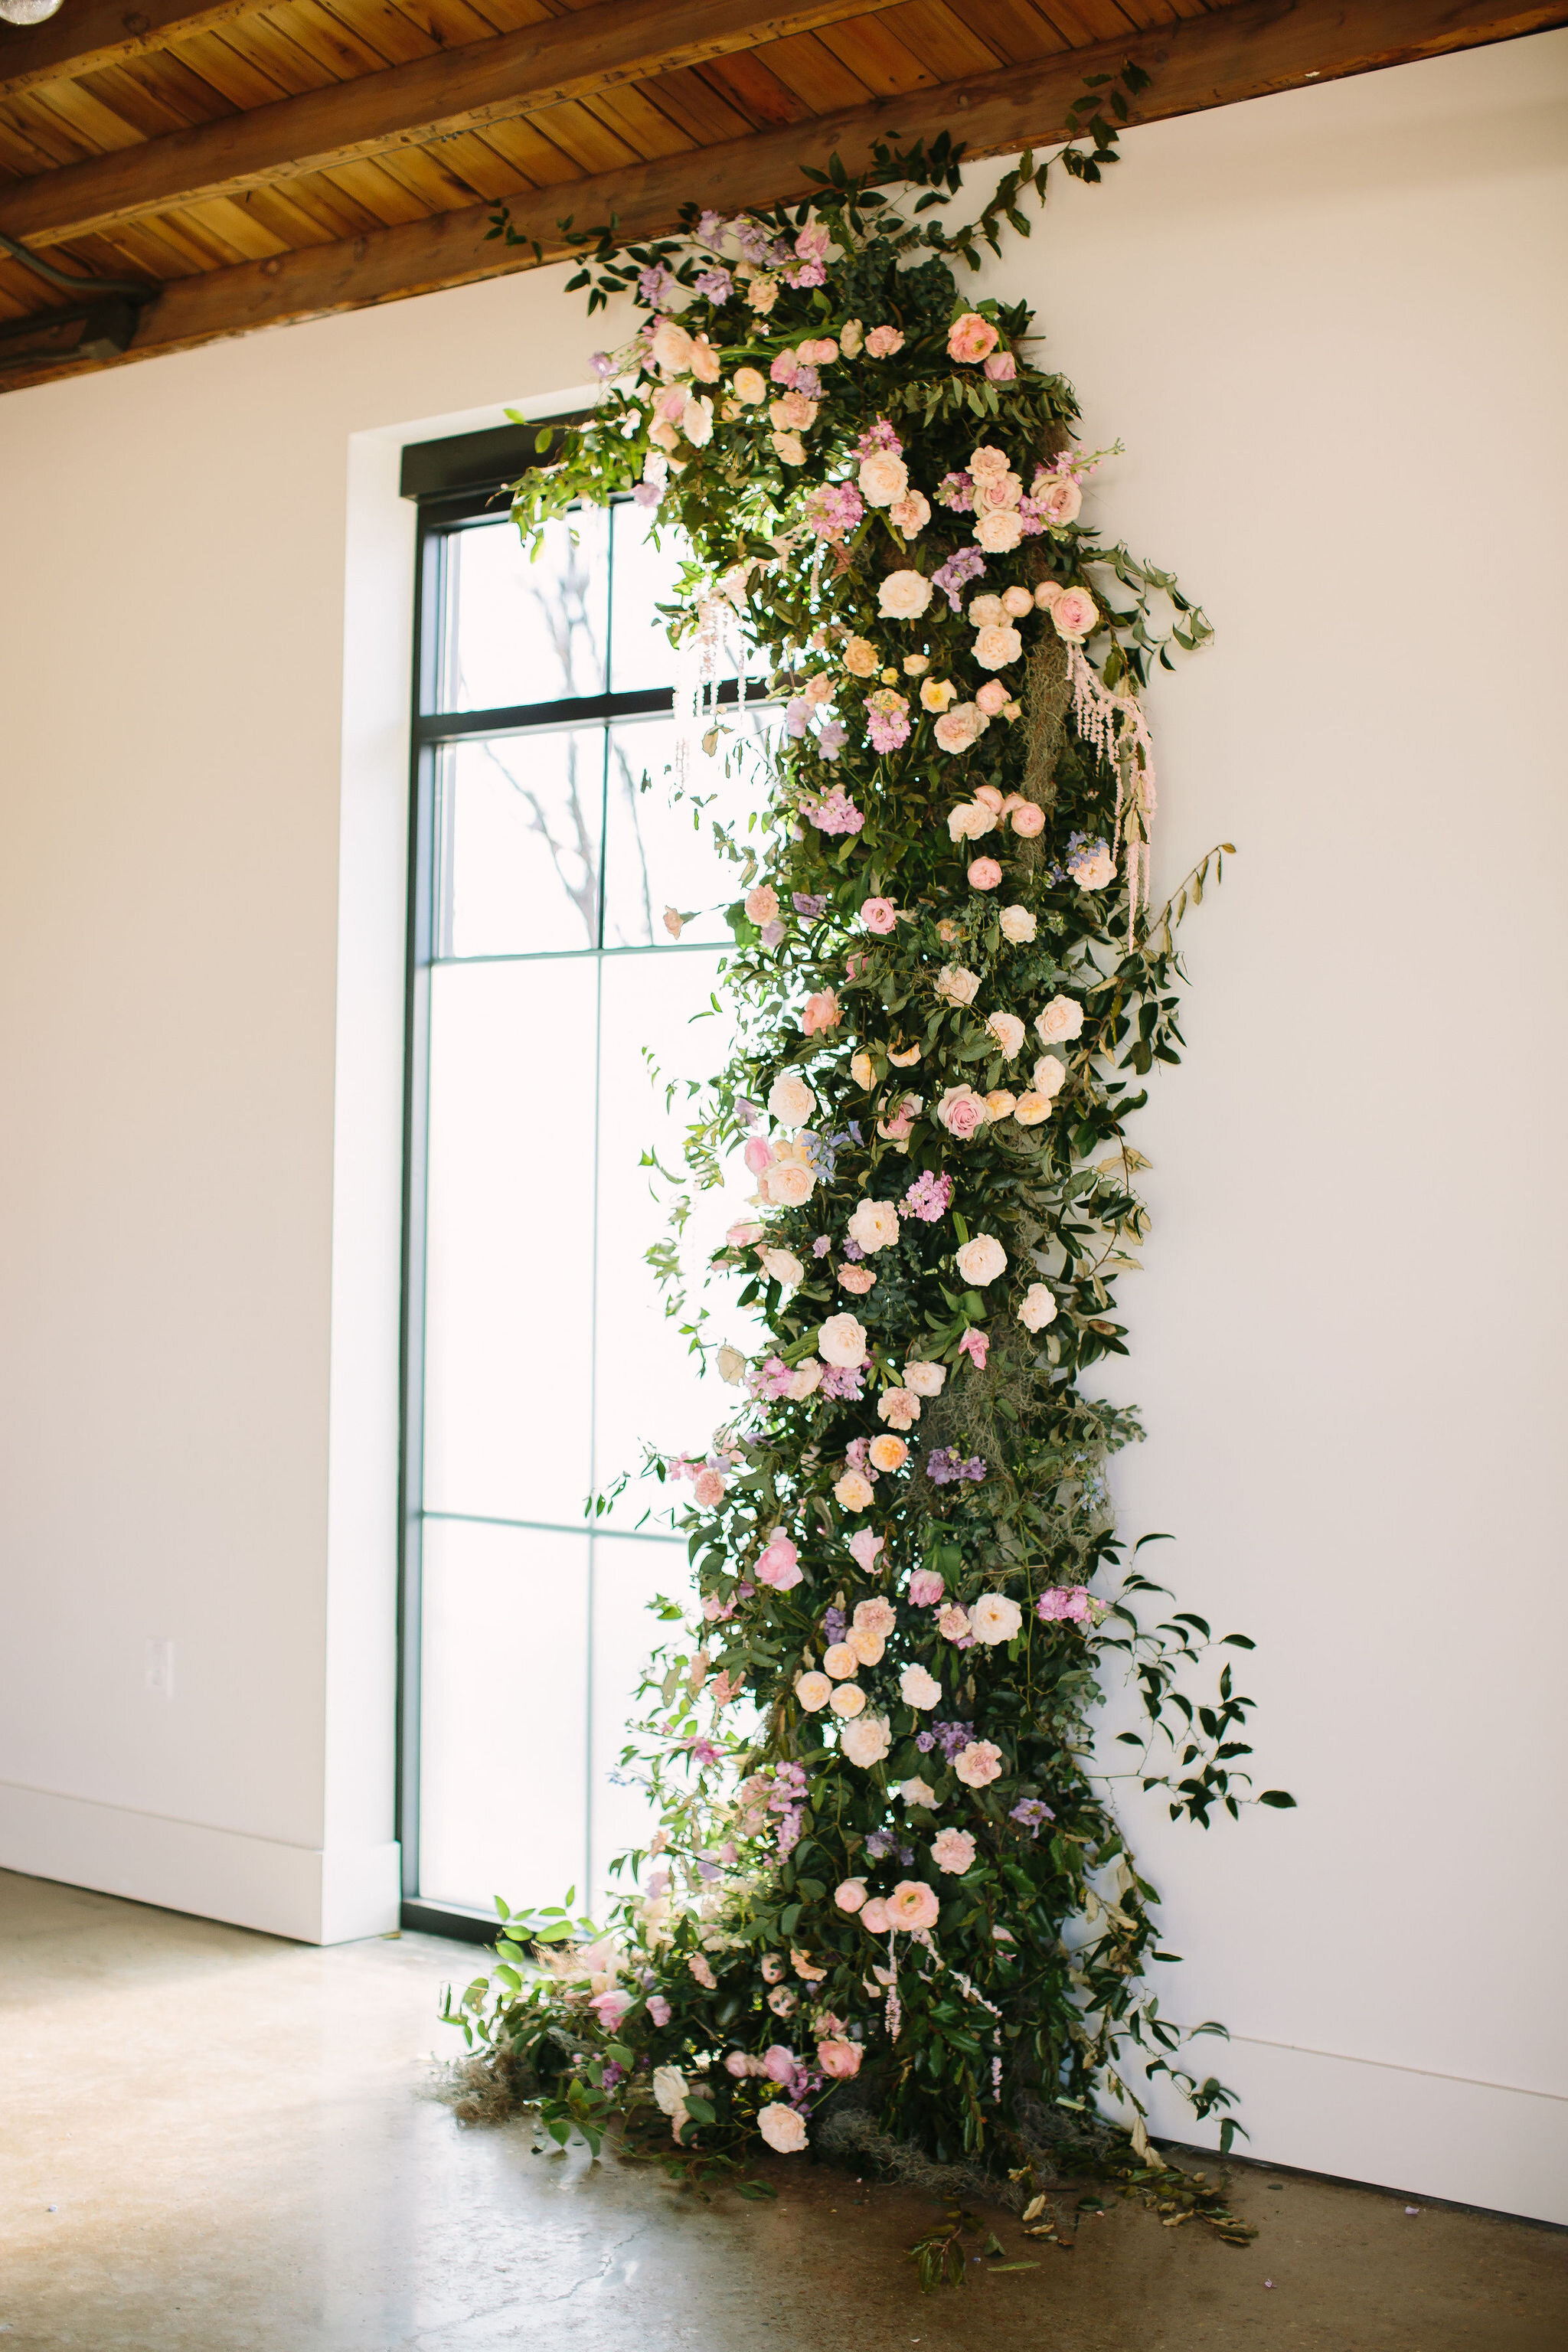 An intimate installation intensive at The Saint Elle in Nashville. Students learned how to create and build 3 different kinds of installations. This climbing window install is filled with flowers in pastel hues including petal heavy roses, lavender …